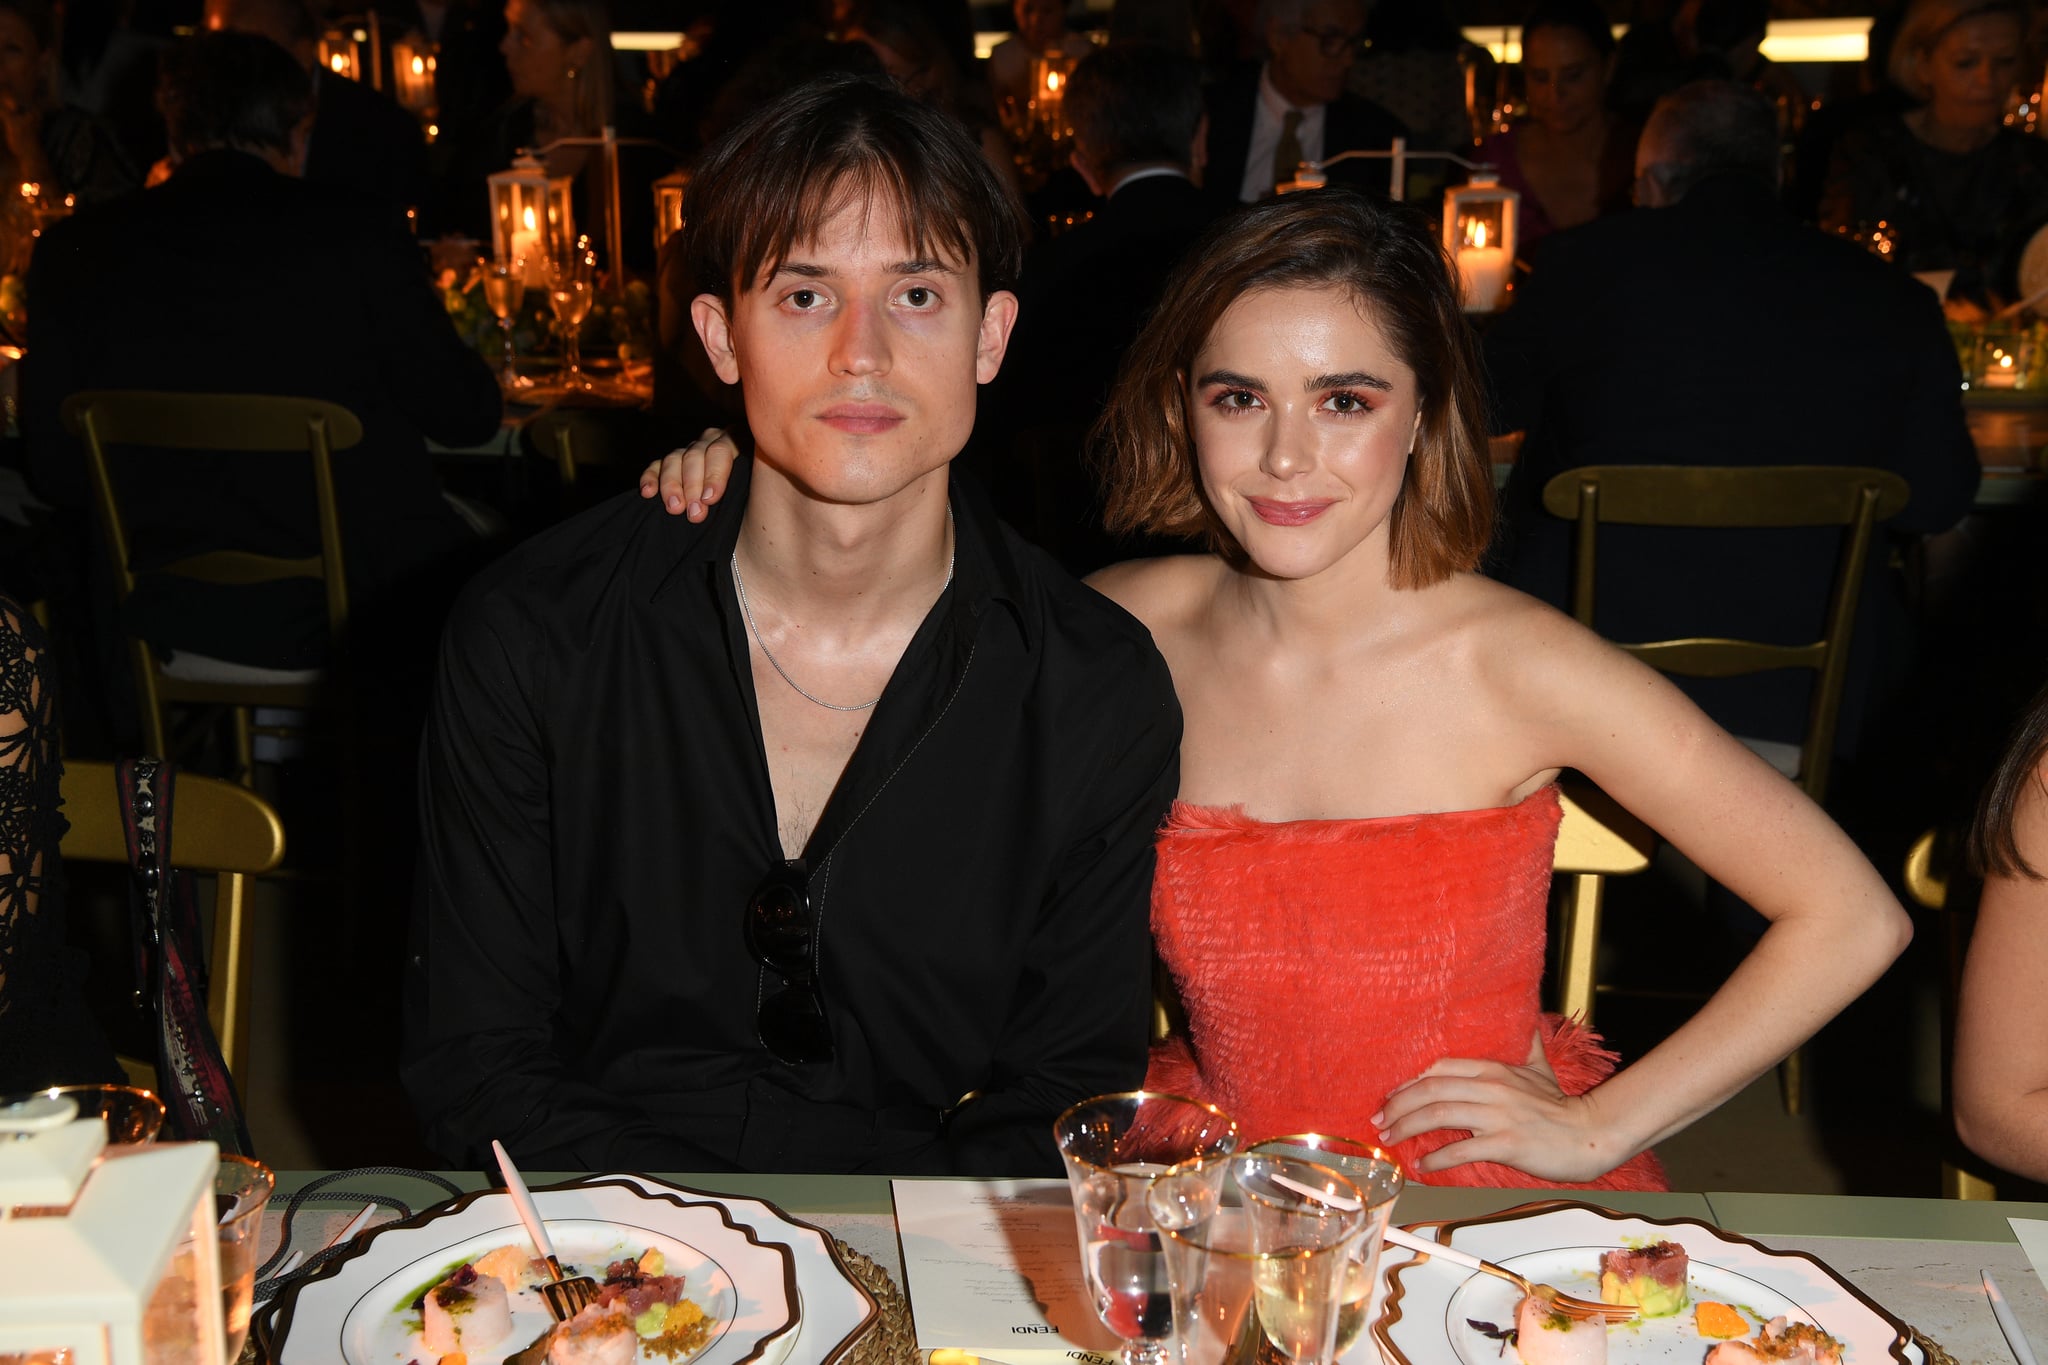 ROME, ITALY - JULY 04: Christian Coppola and Kiernan Shipka attend the Fendi Couture Fall Winter 2019/2020 Dinner on July 04, 2019 in Rome, Italy. (Photo by Daniele Venturelli/Daniele Venturelli/ Getty Images for Fendi)